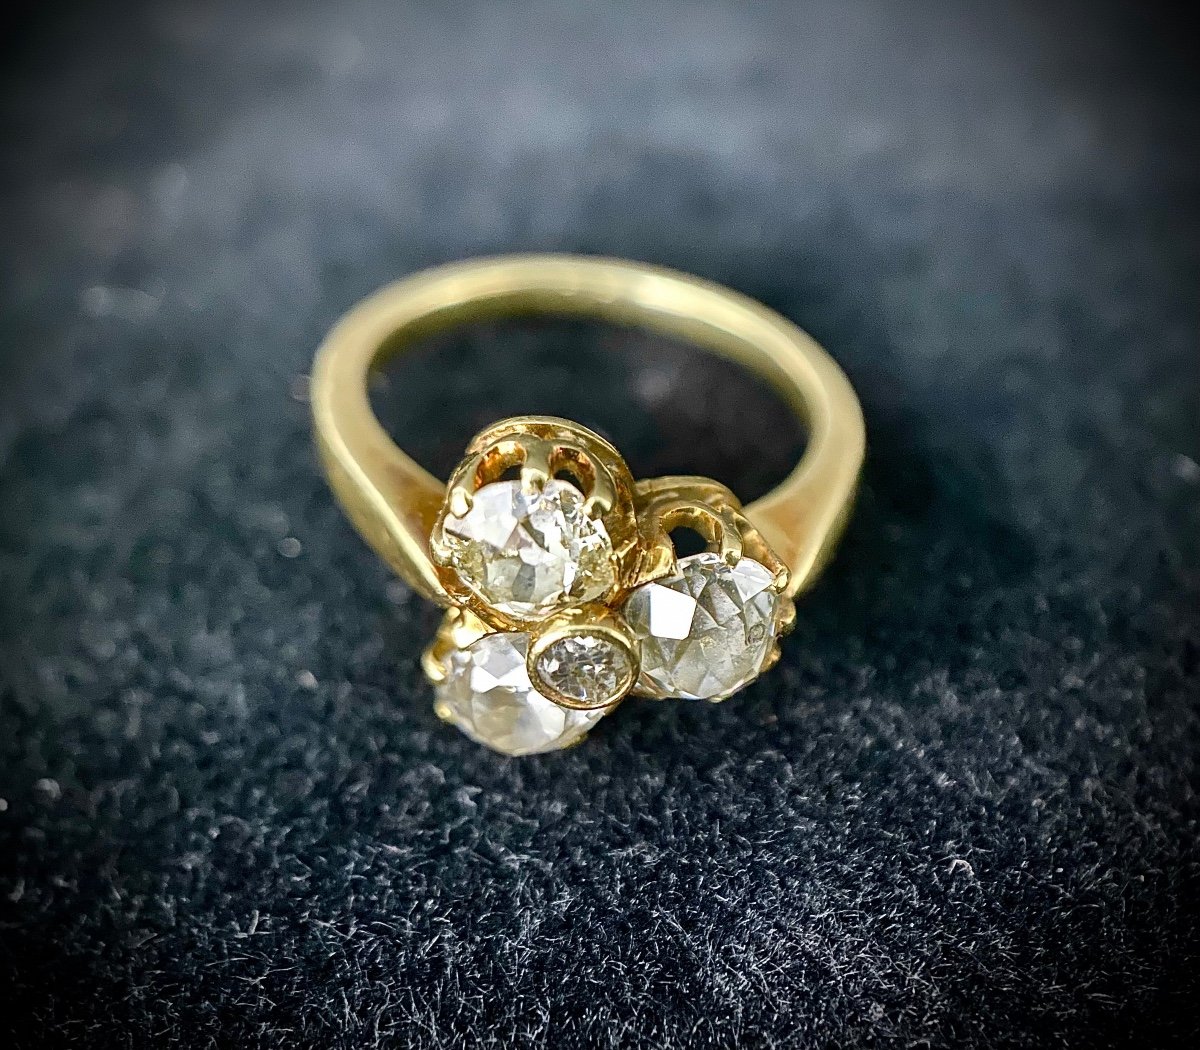 Napoleon III Ring In 18 Carat Yellow Gold Set With 3 Old Diamonds Of 0.60 Carat Each-photo-2